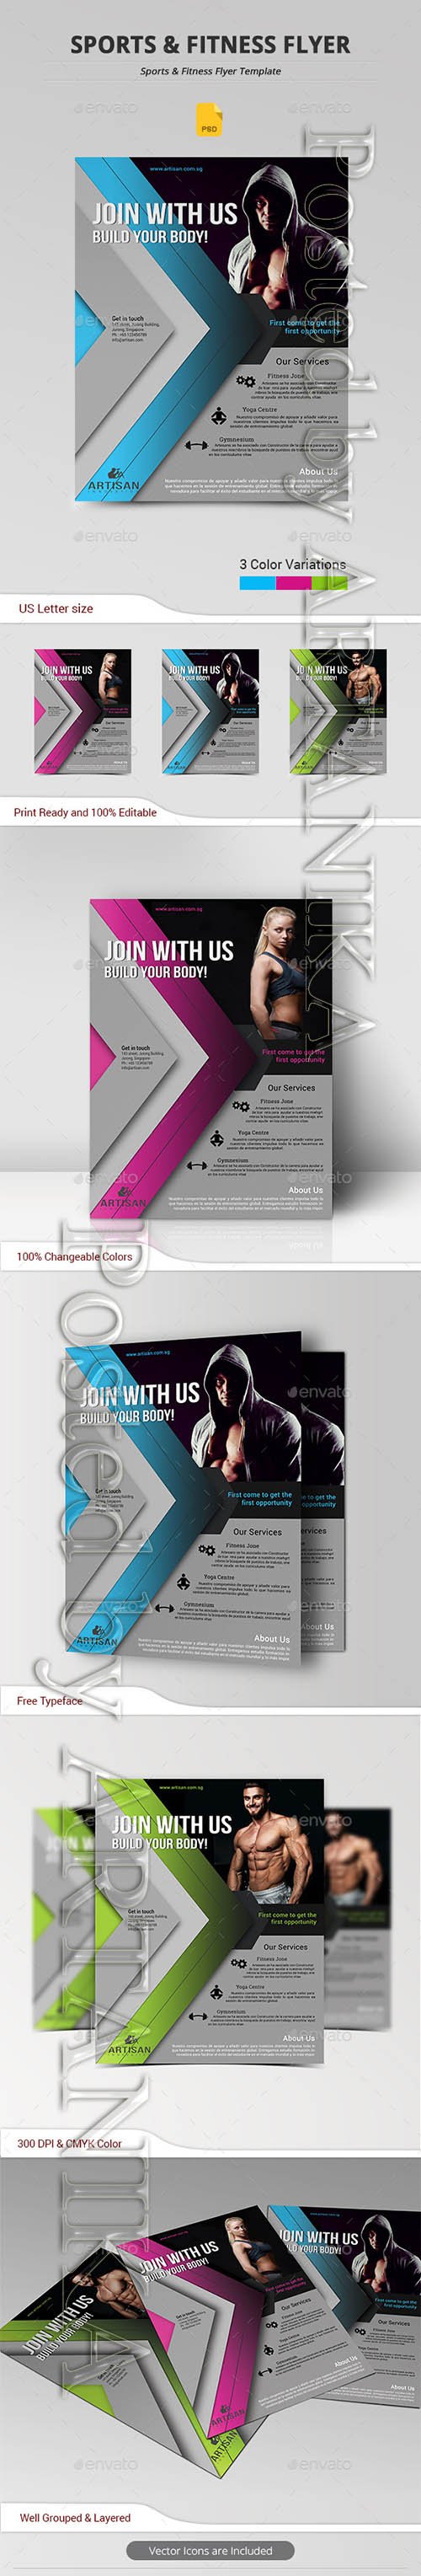 Graphicriver - Sports & Fitness Flyer 13986643